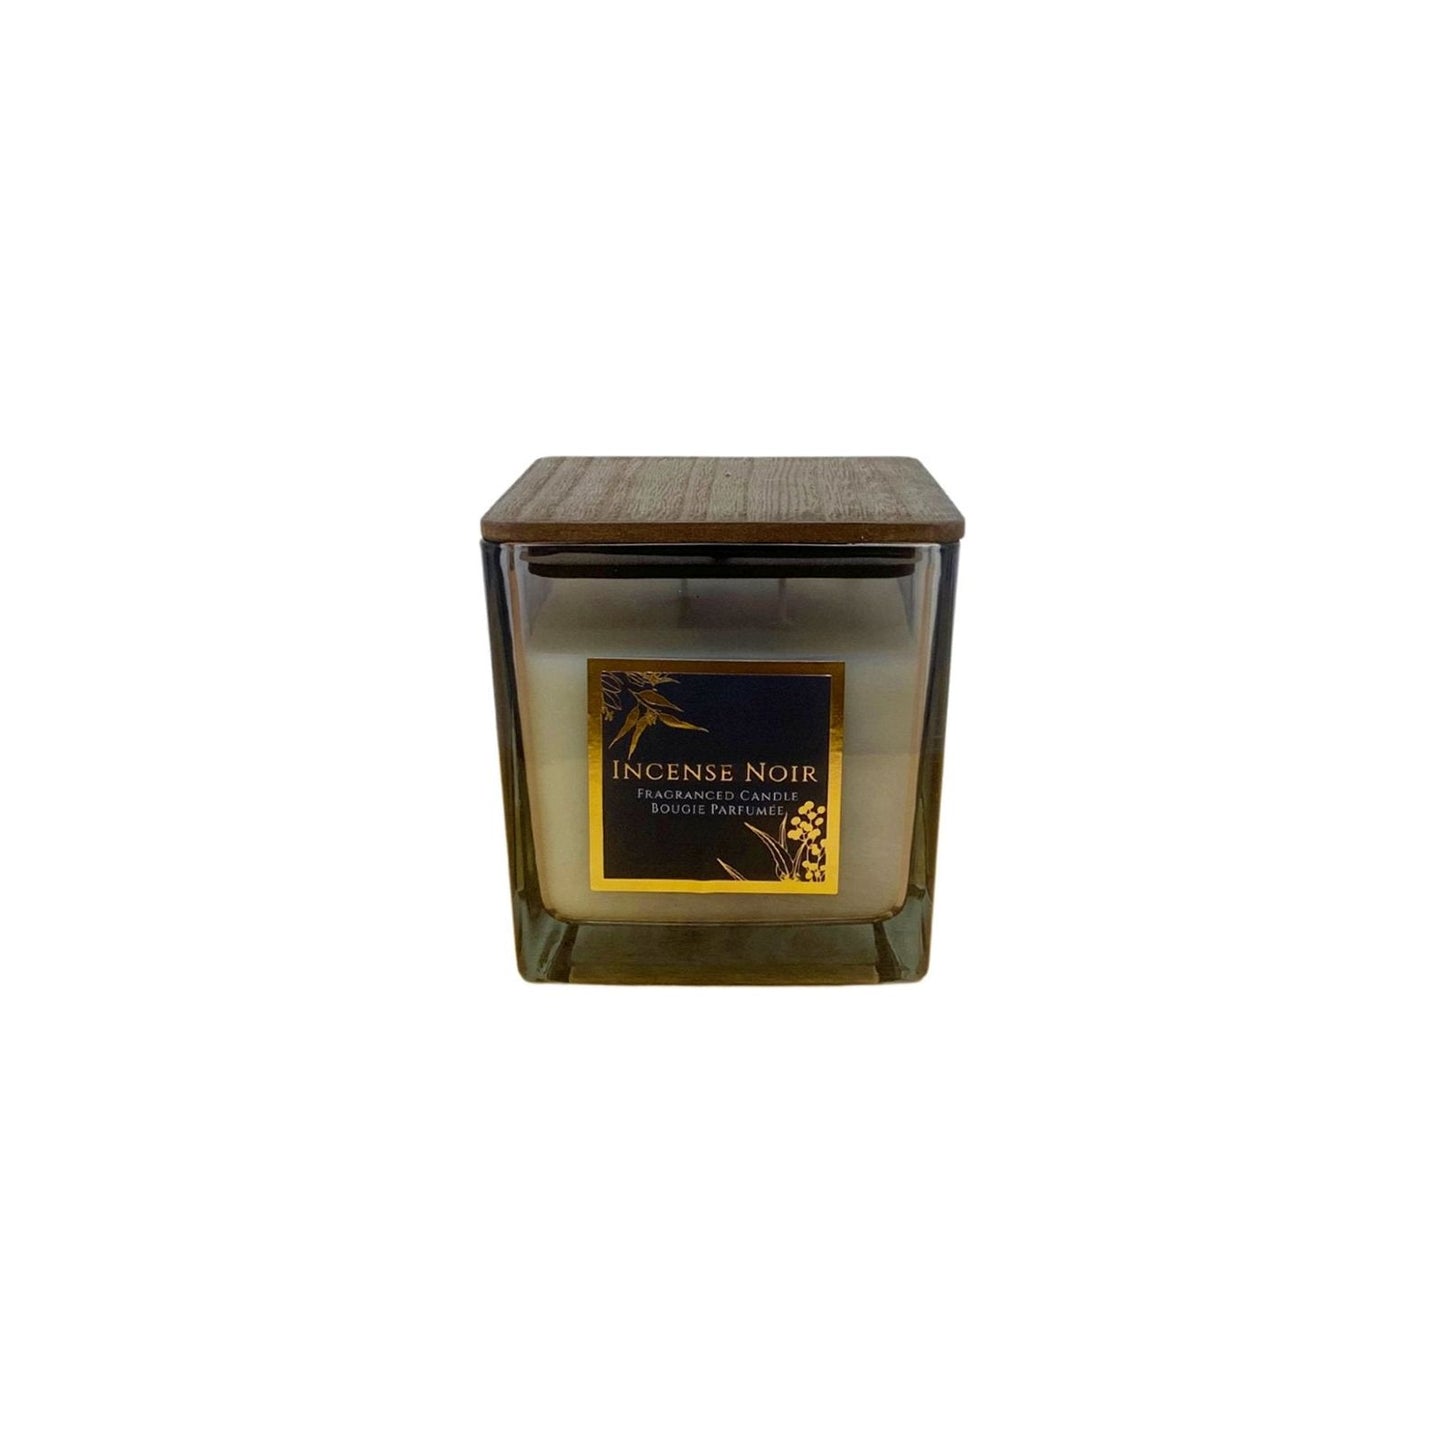 Incense Noir Scented Candle With Wooden Lid - Ashton and Finch